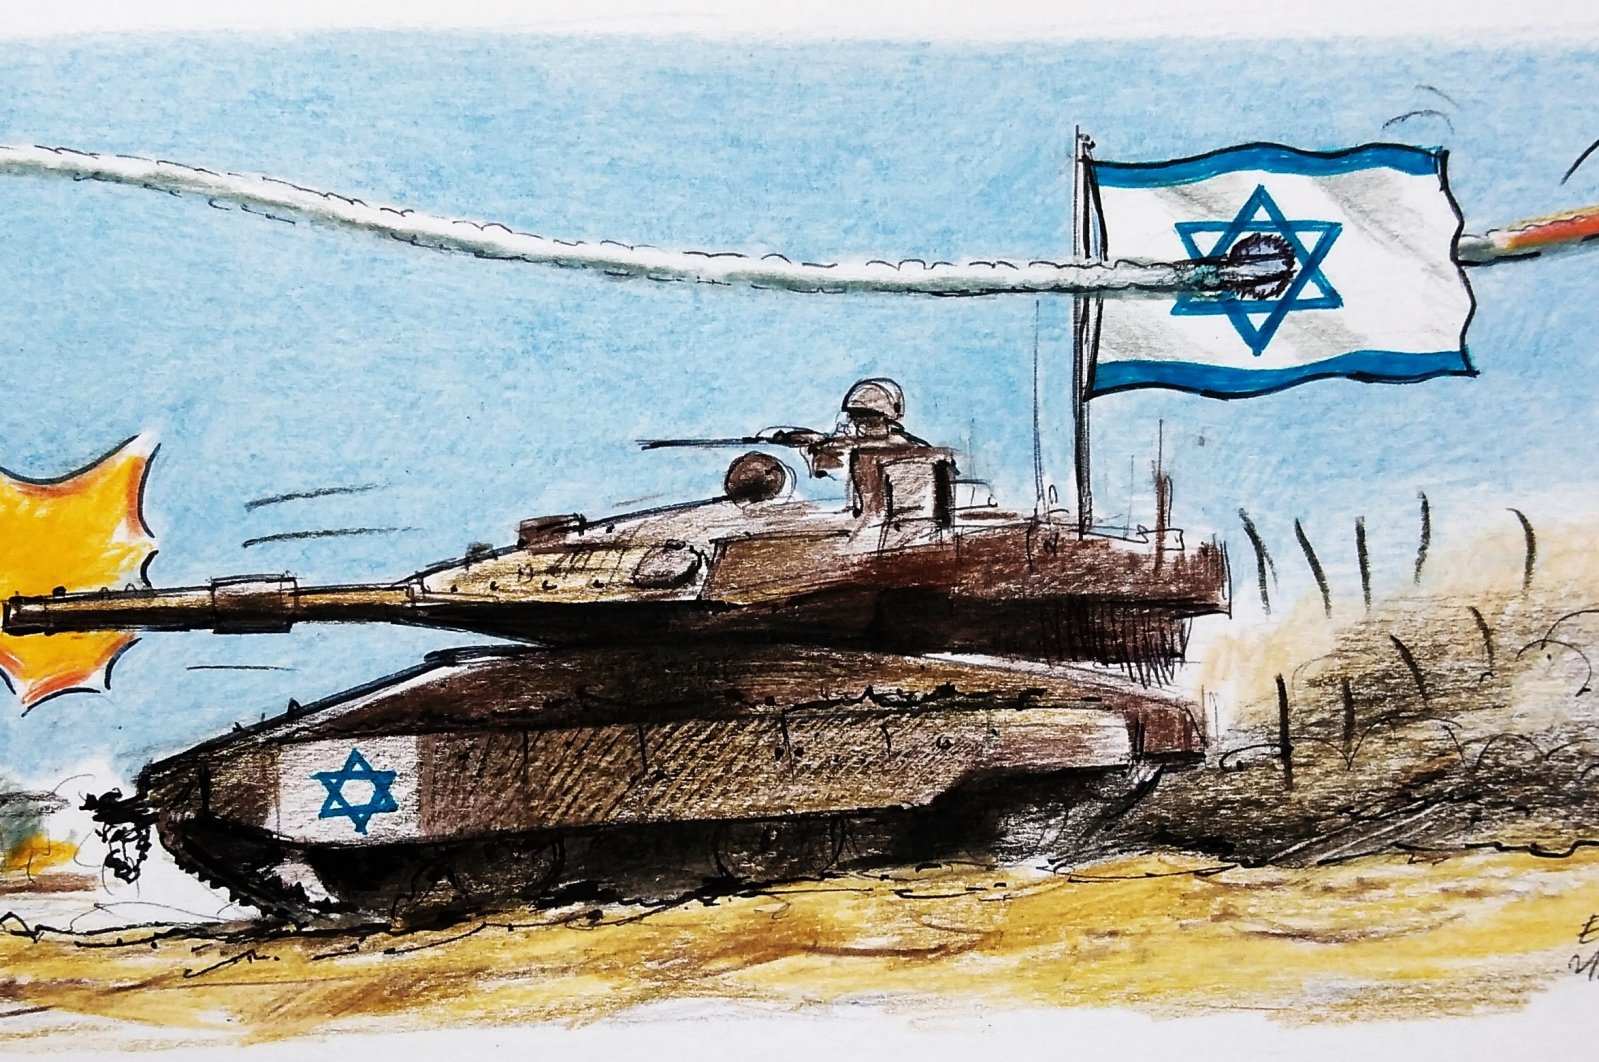 &quot;Field data from that day vividly illustrates the devastation caused by gunfire from Israeli occupation army Apache helicopters, resulting in the festival area and surrounding cars being reduced to ashes.&quot; (Illustration by Erhan Yalvaç)